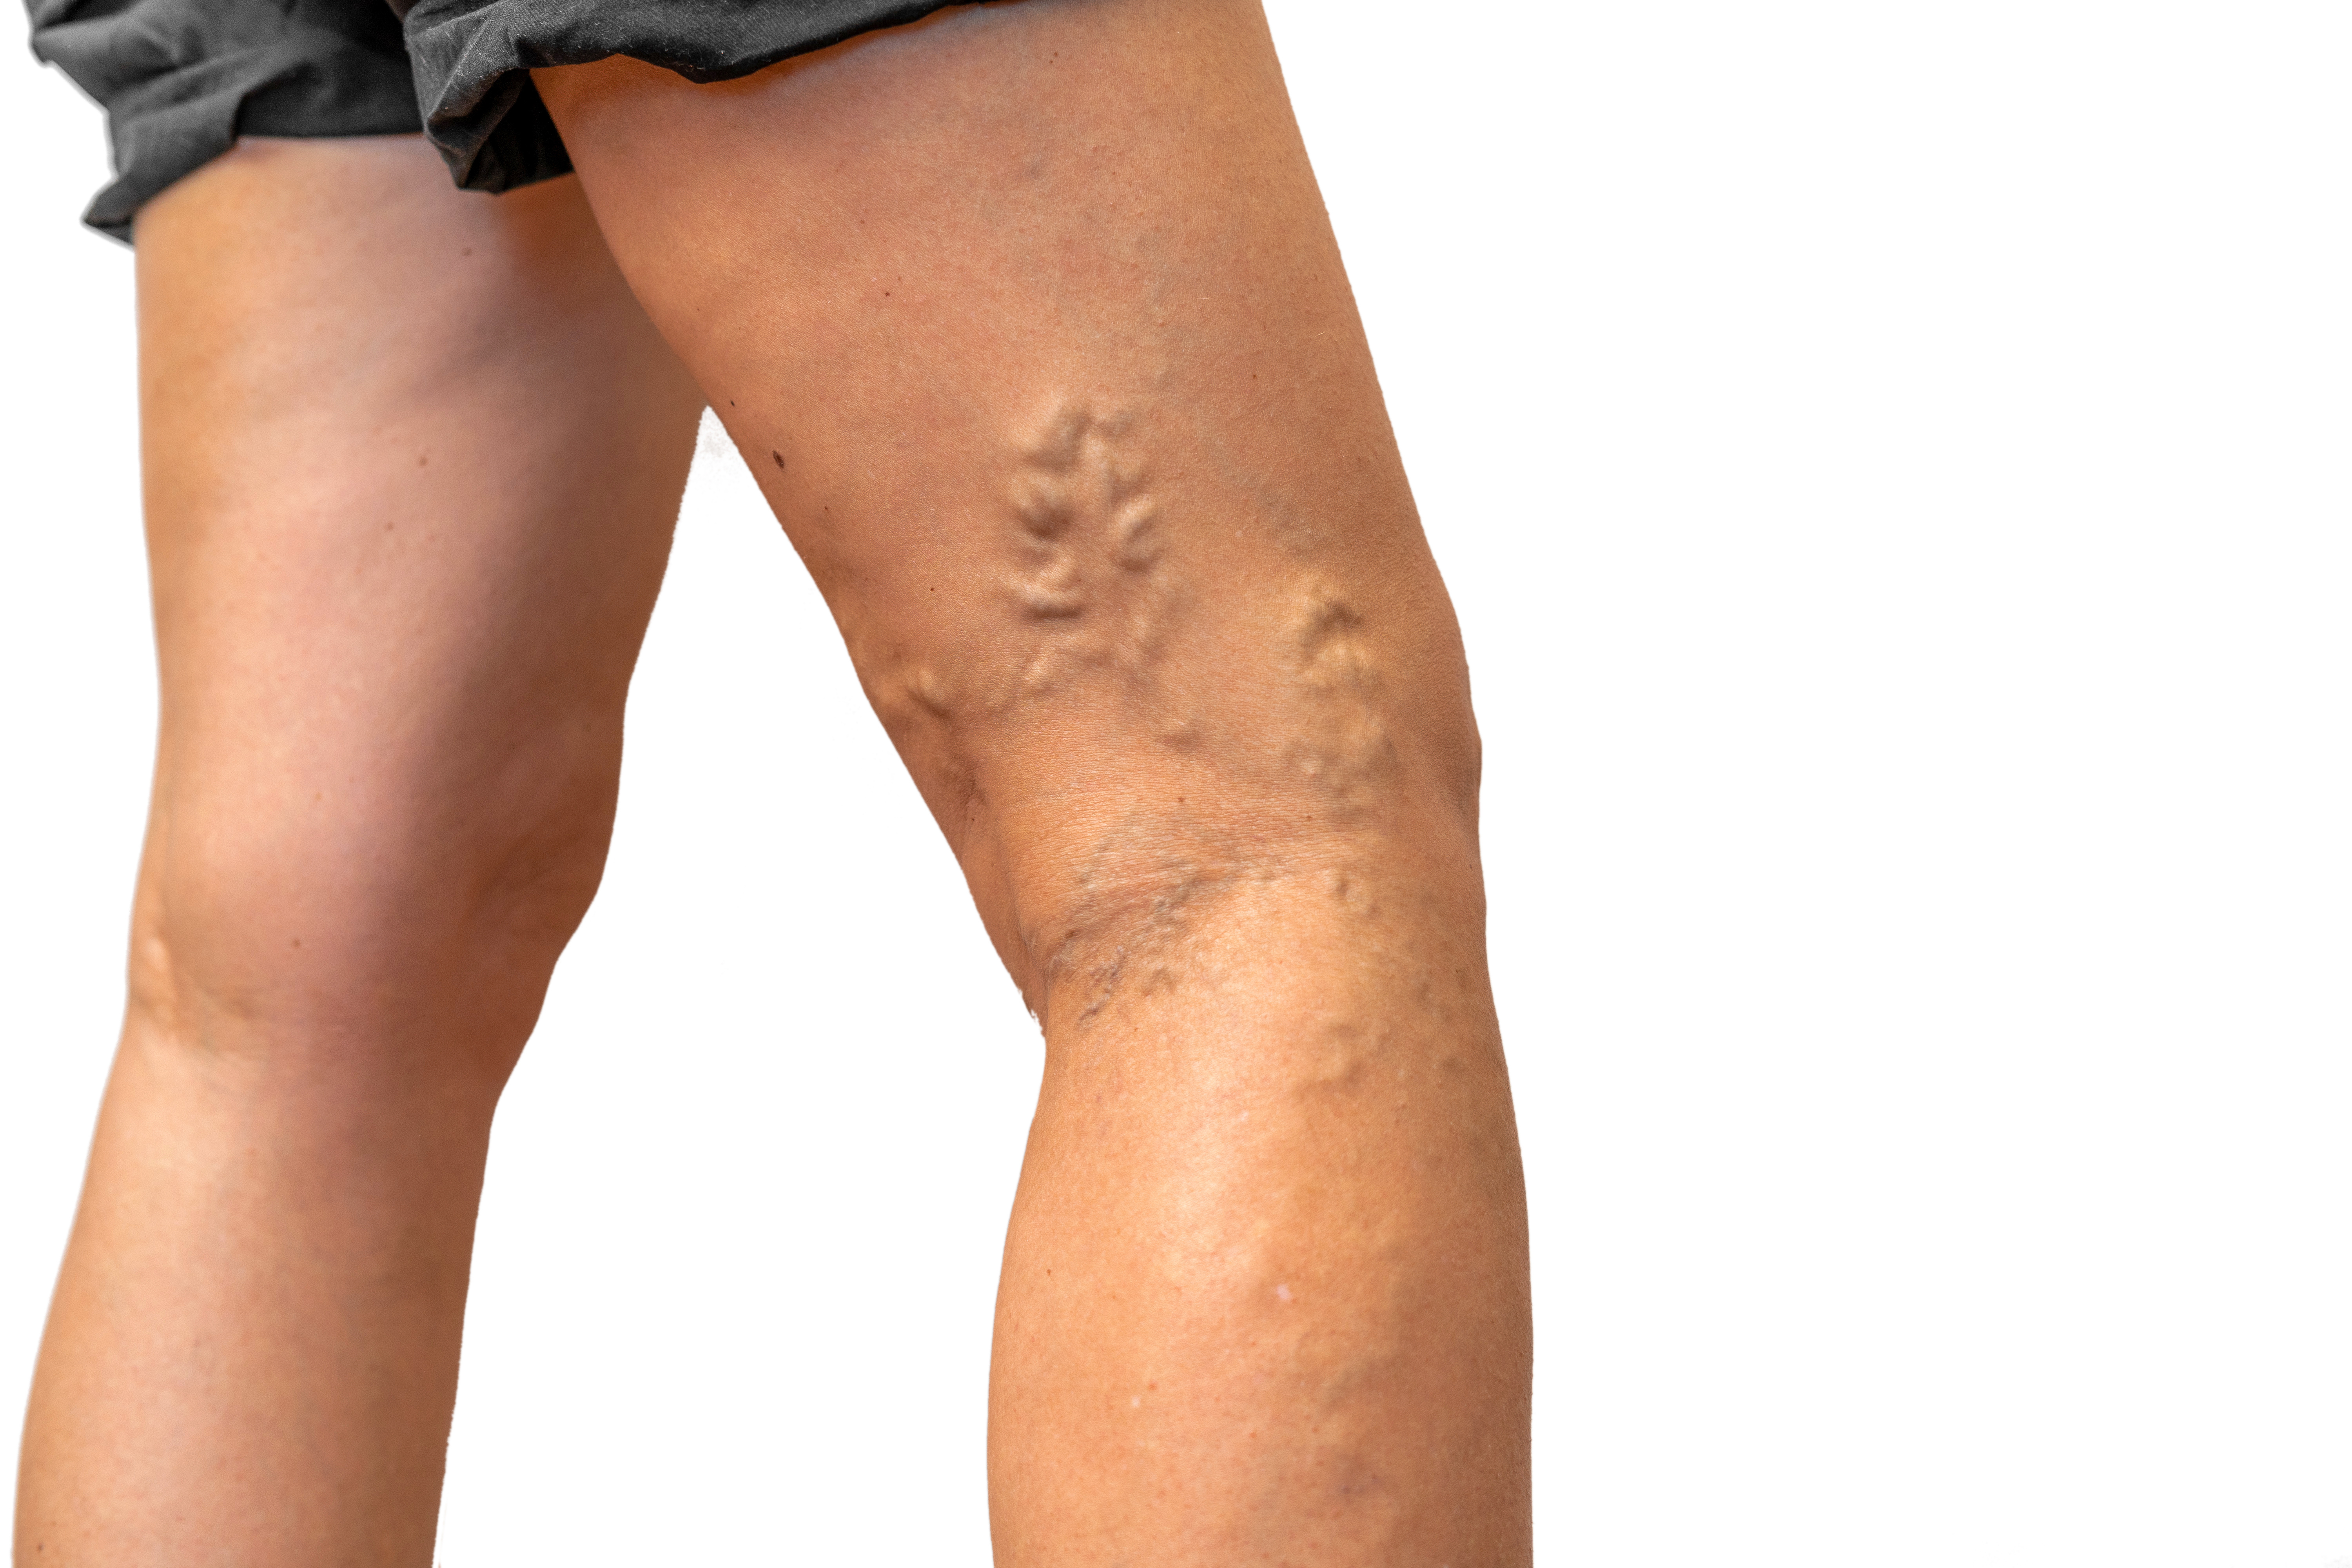 I have blue veins on my legs, are they varicose veins?